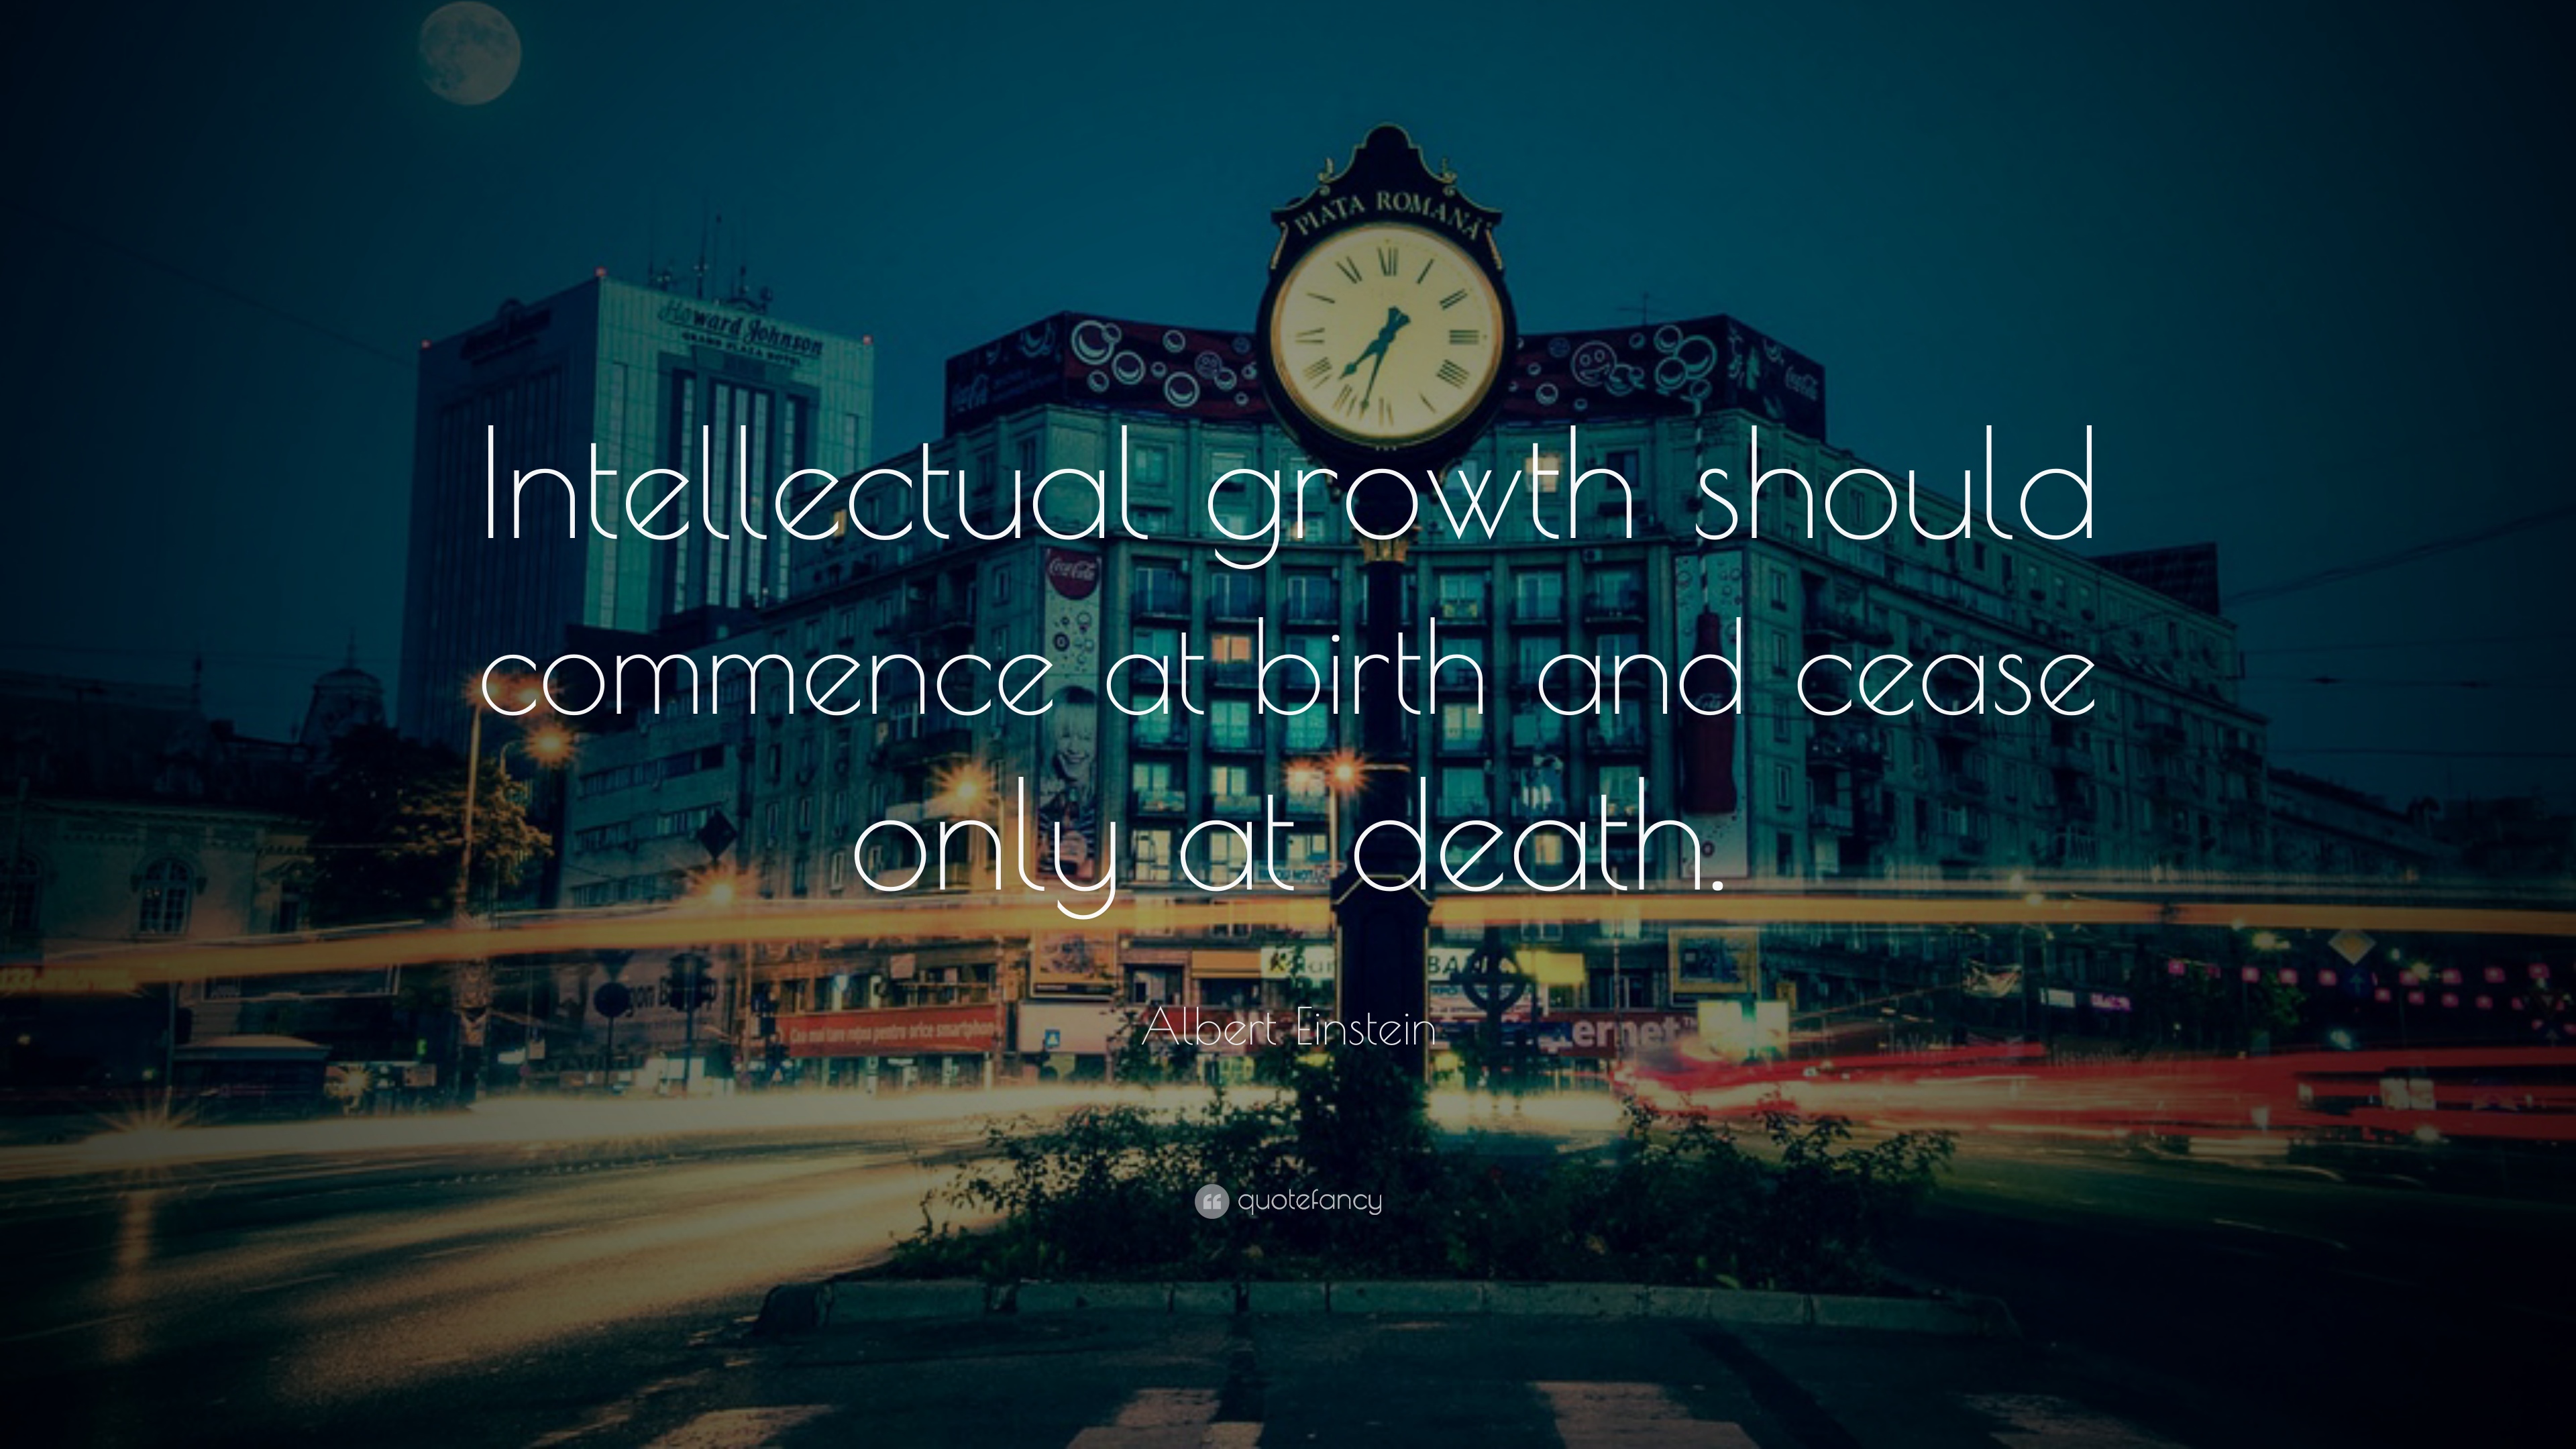 Albert Einstein Quote: “Intellectual growth should commence